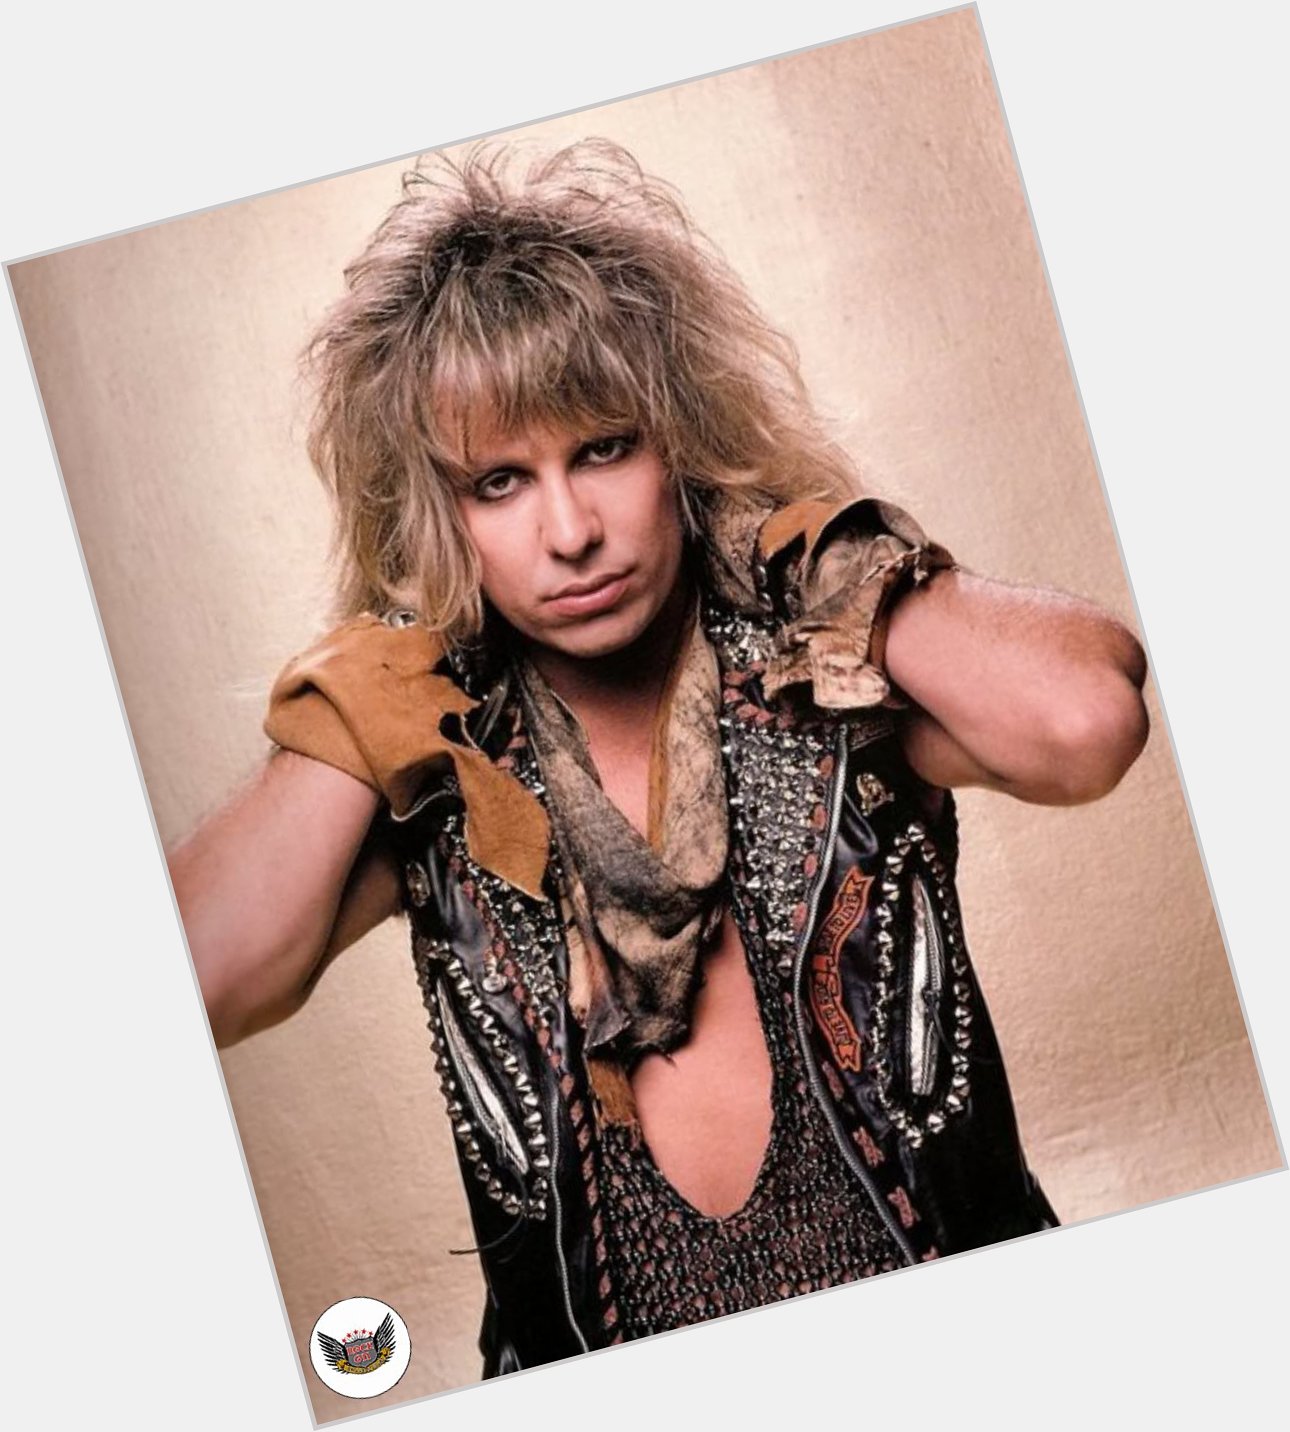 Happy Birthday Vince Neil! We hope you have a rockin\ day!    